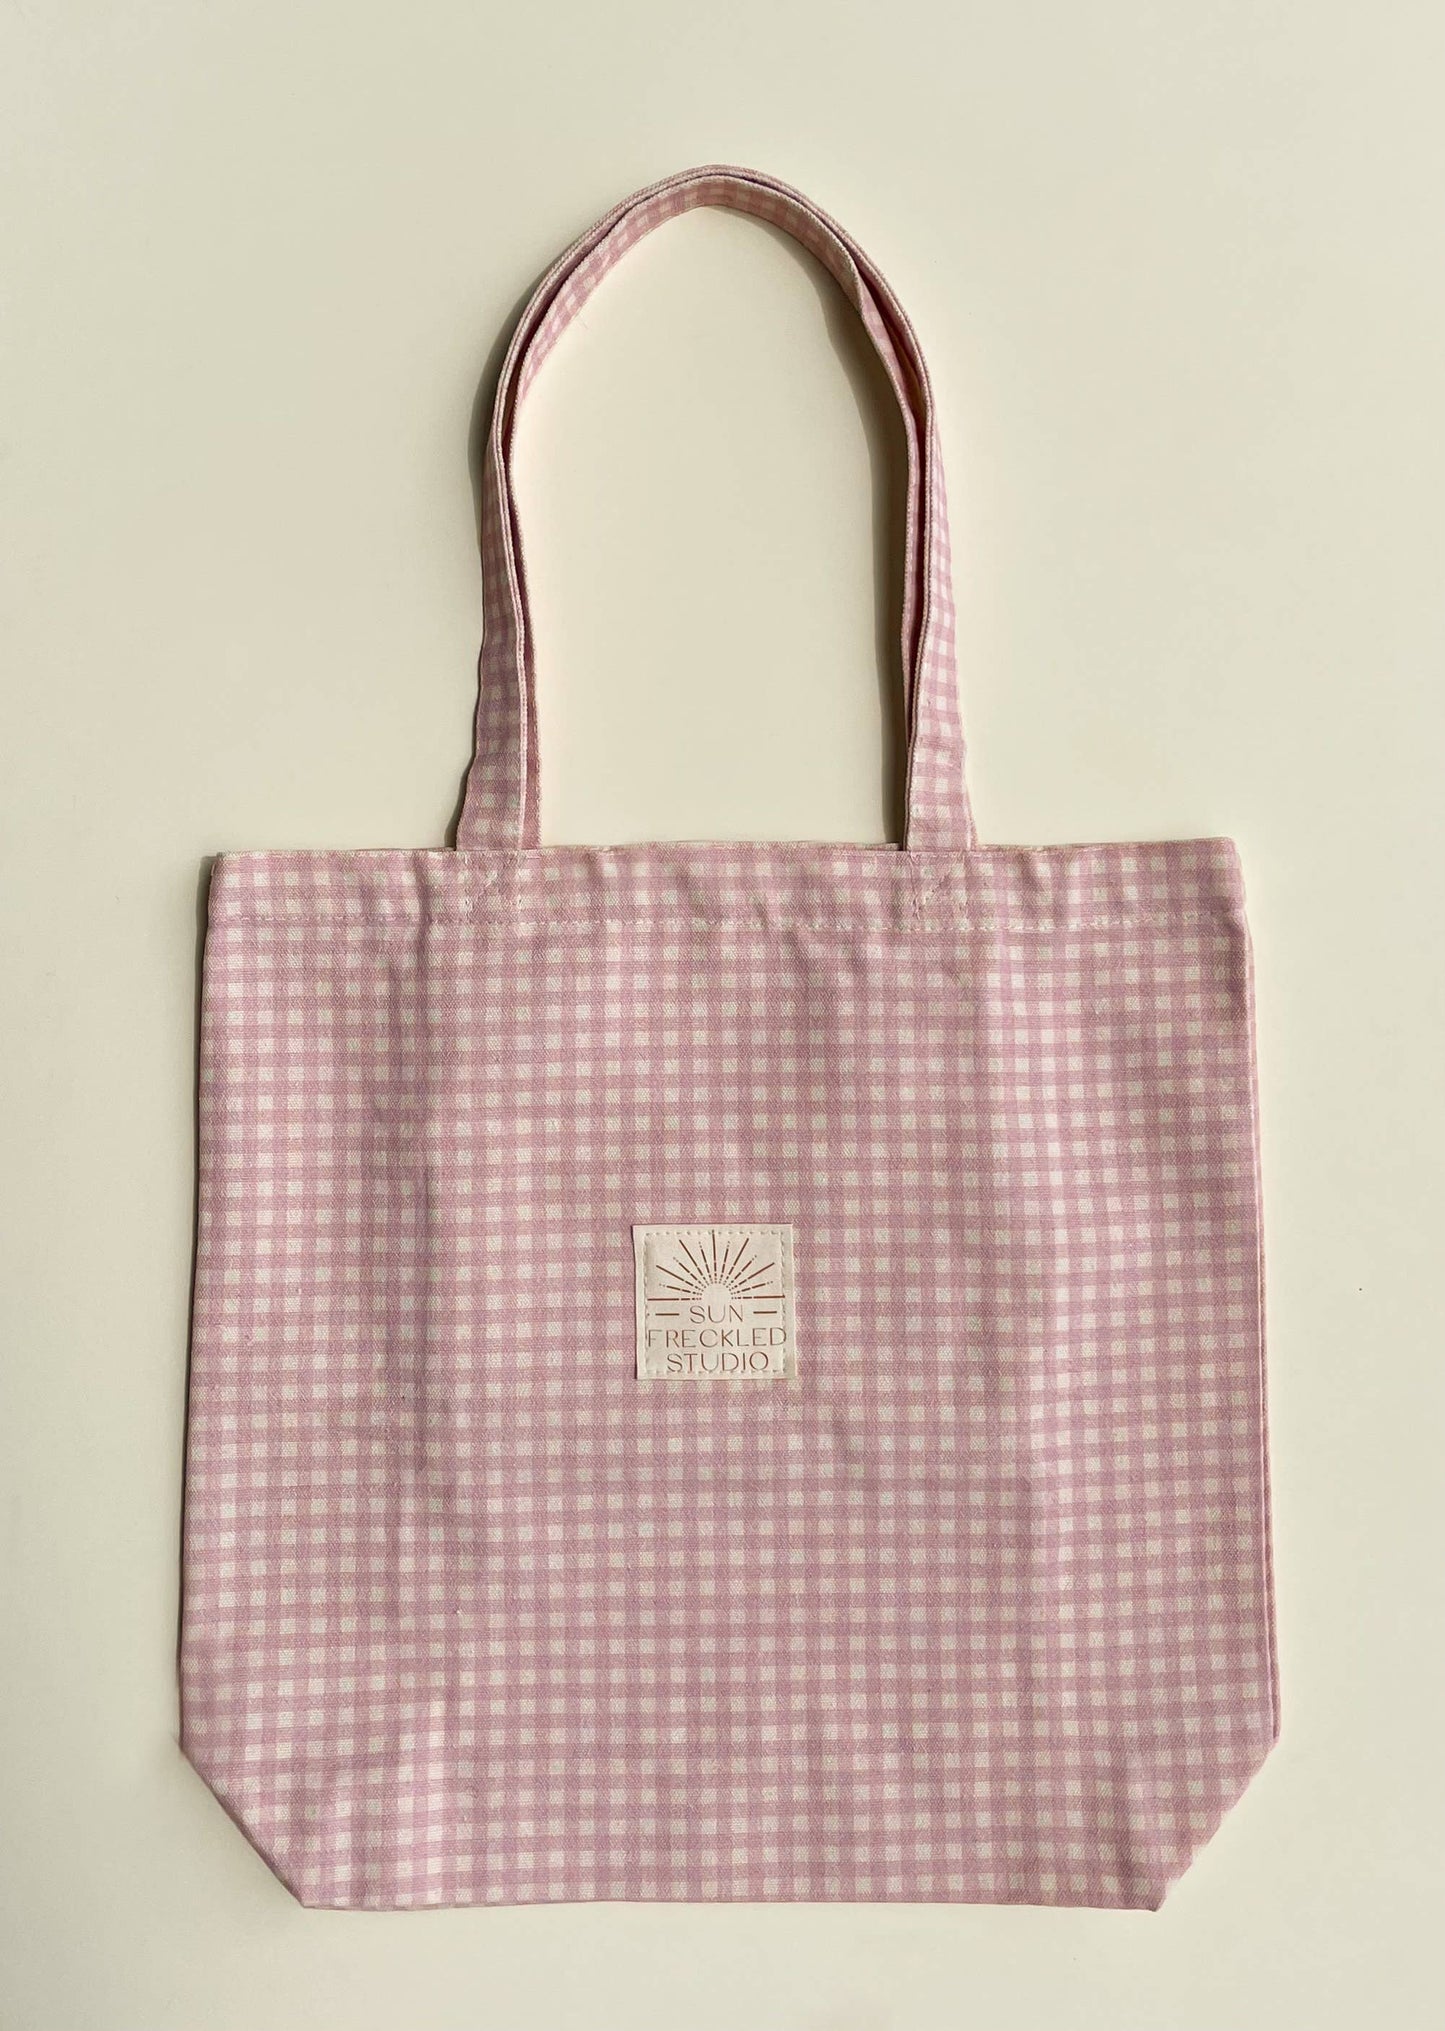 Strawberry Gingham Tote Bag - Storm and Sky Shoppe